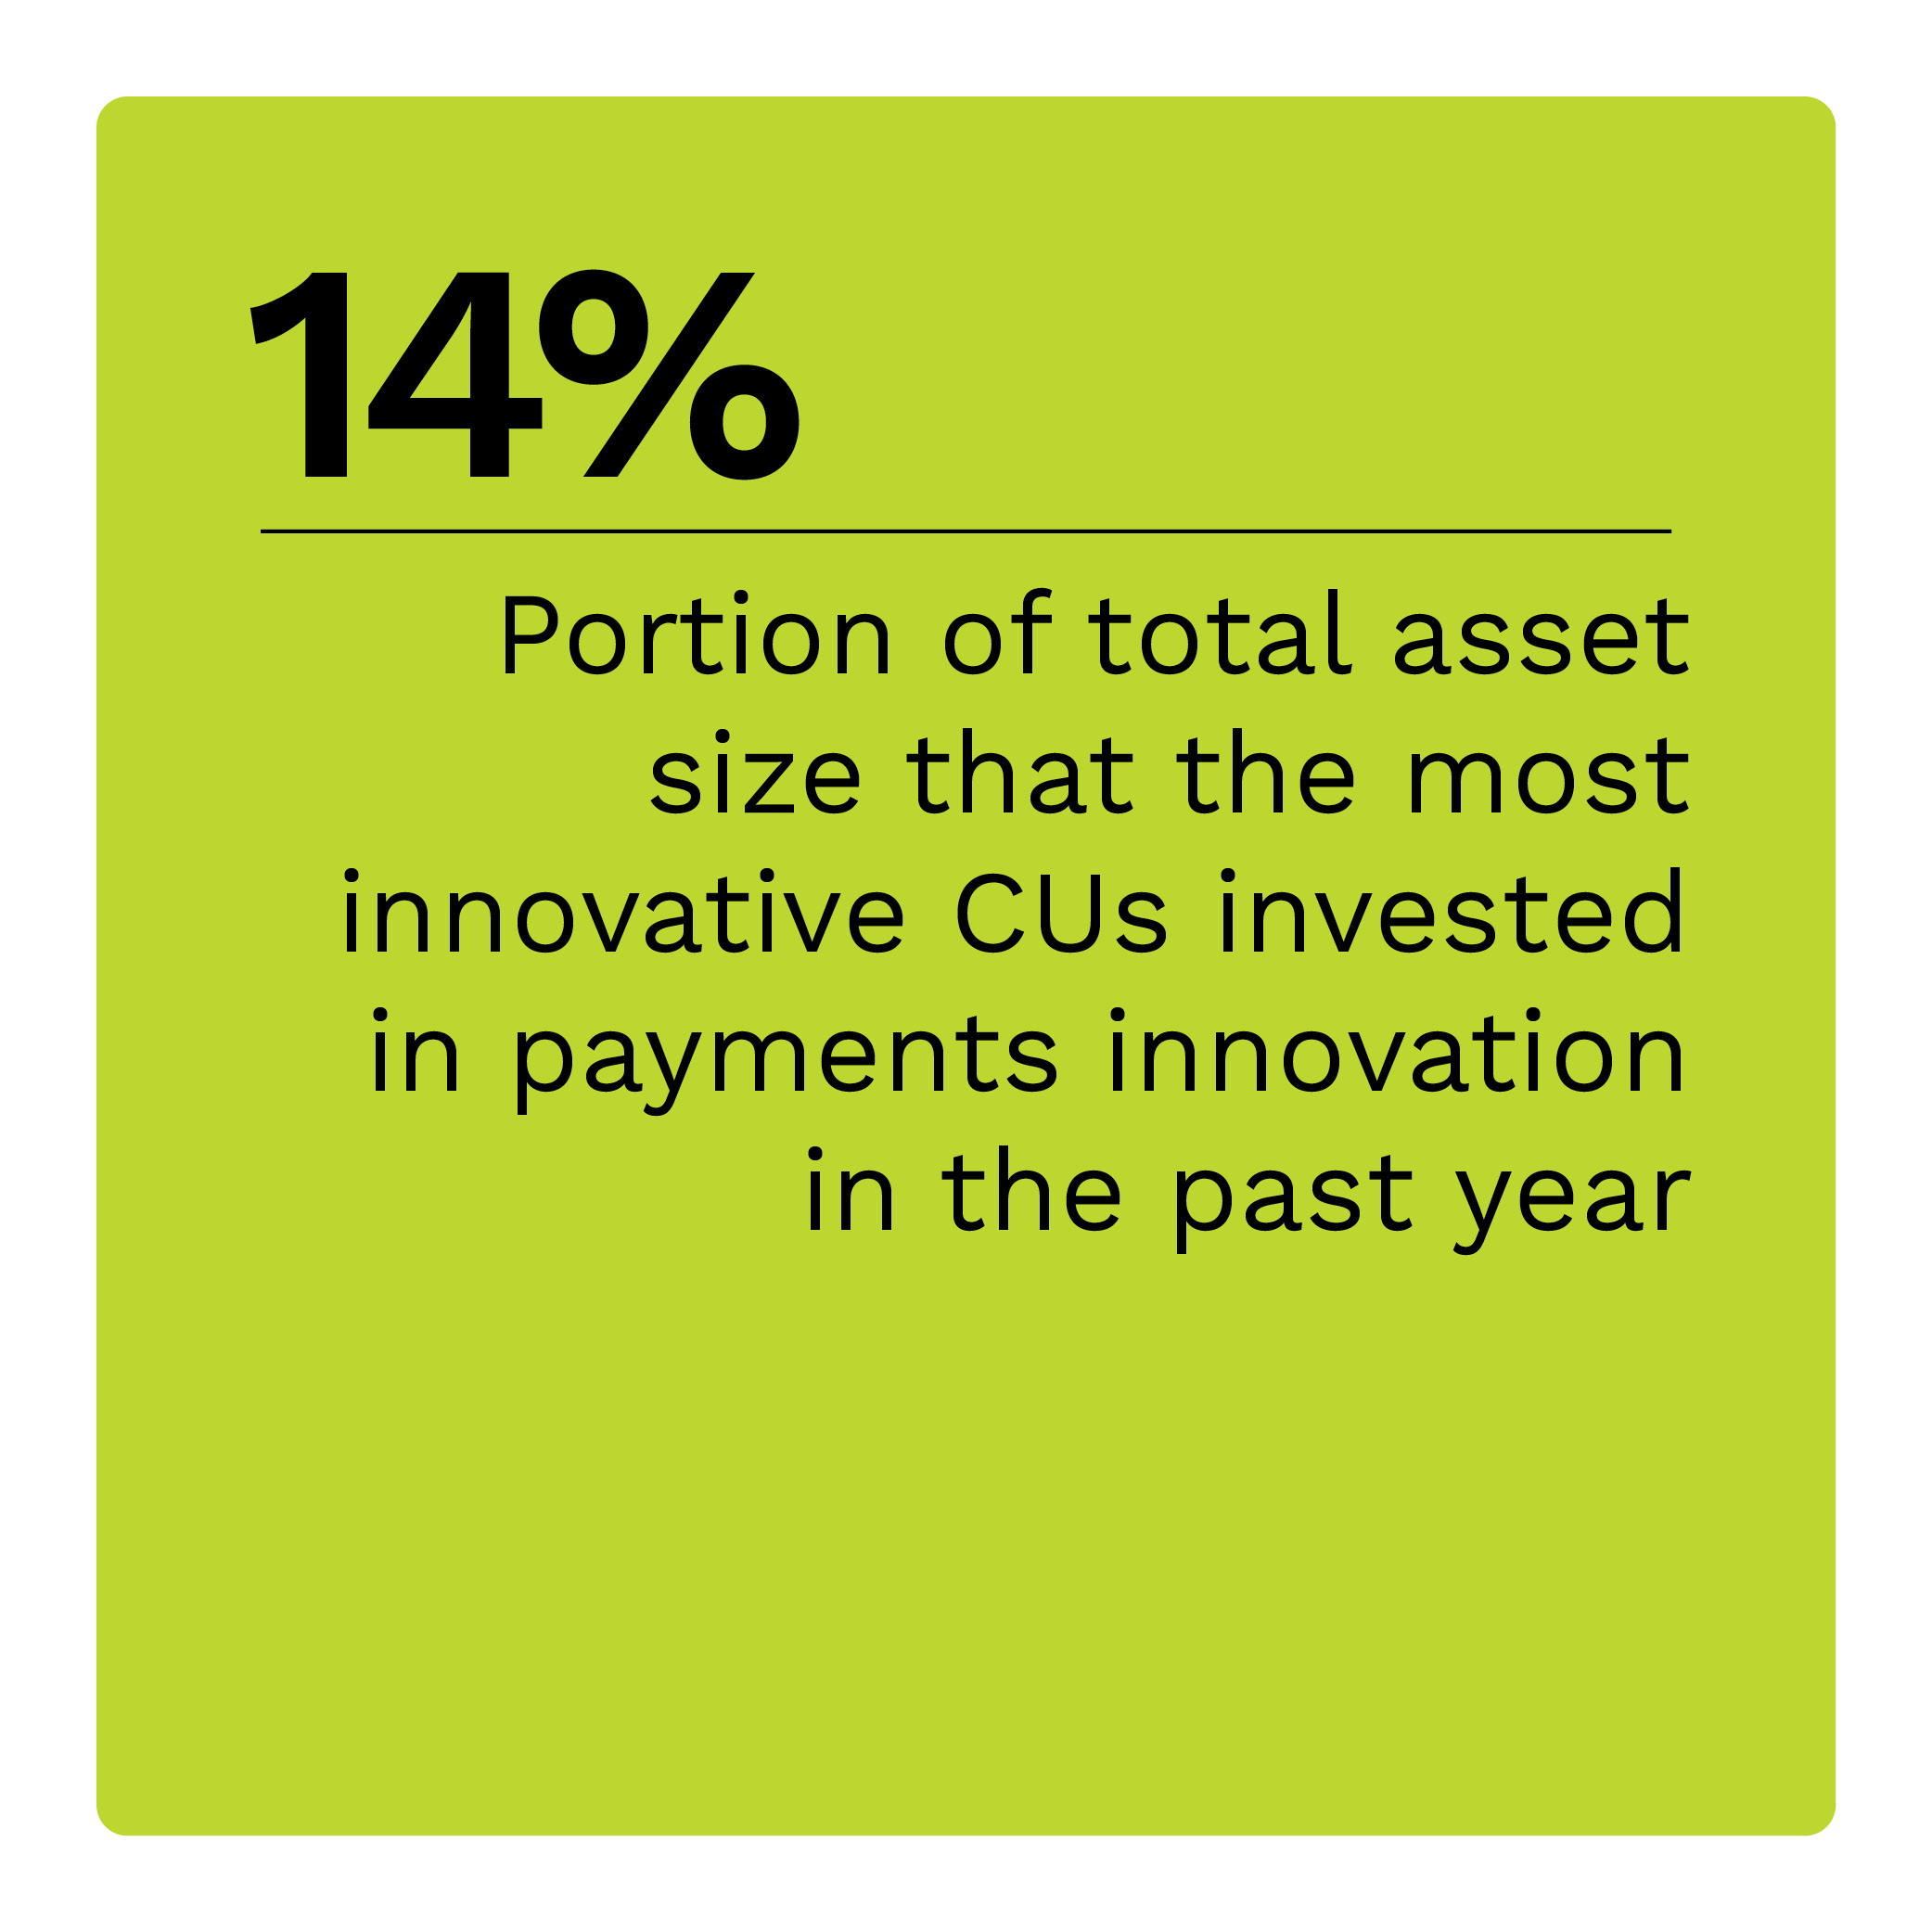 14%: Portion of total asset size that the most innovative CUs invested in payments innovation in the past year